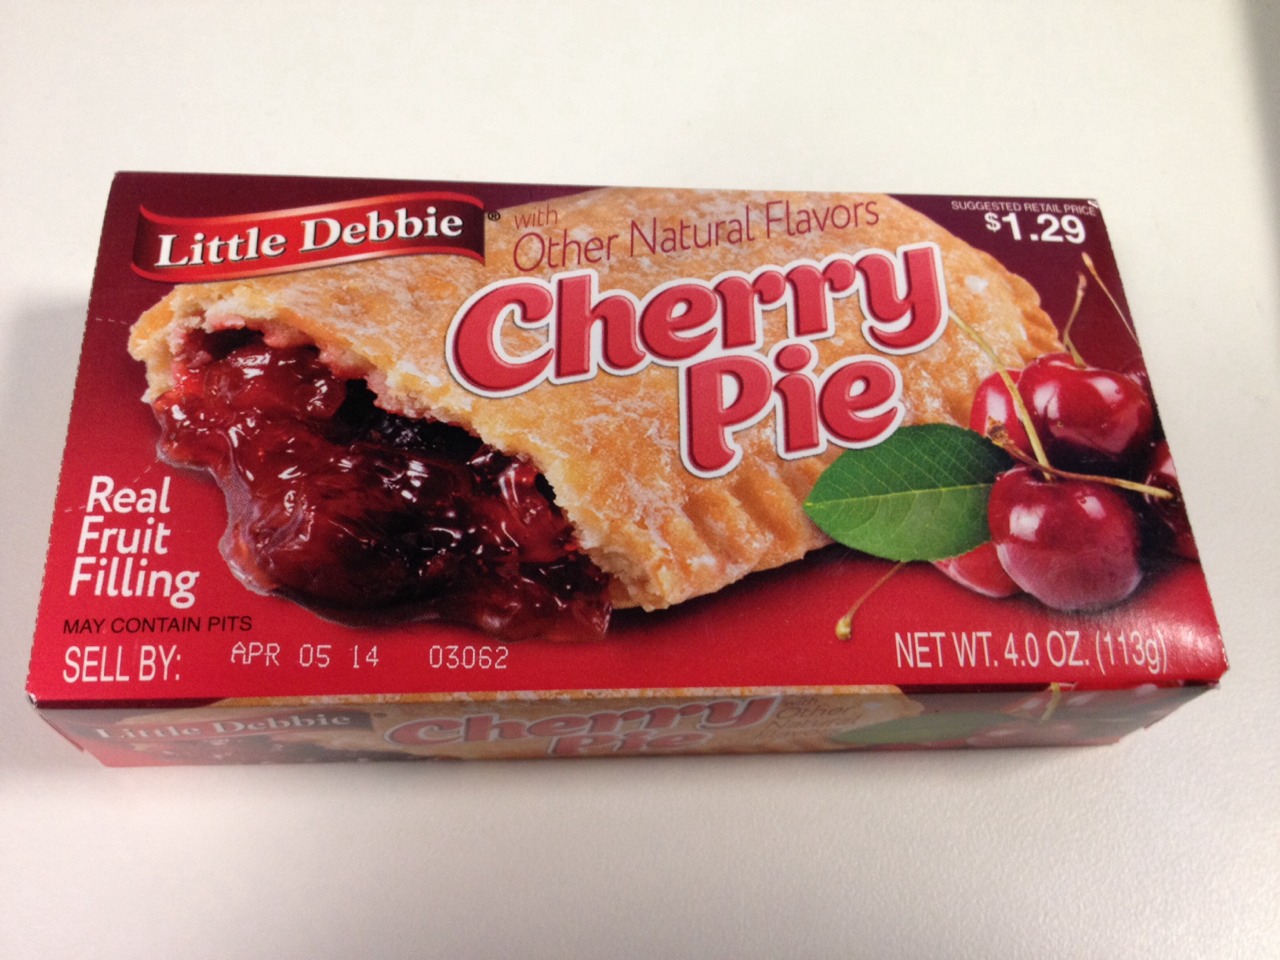 food troll cherry pie - sverige with Other Natural Flavors $1.29 Little Debbie Cherry Real Fruit Filling May Contain Pits Sell By Apr 05 14 03062 Net Wt. 4.0 Oz. 1139